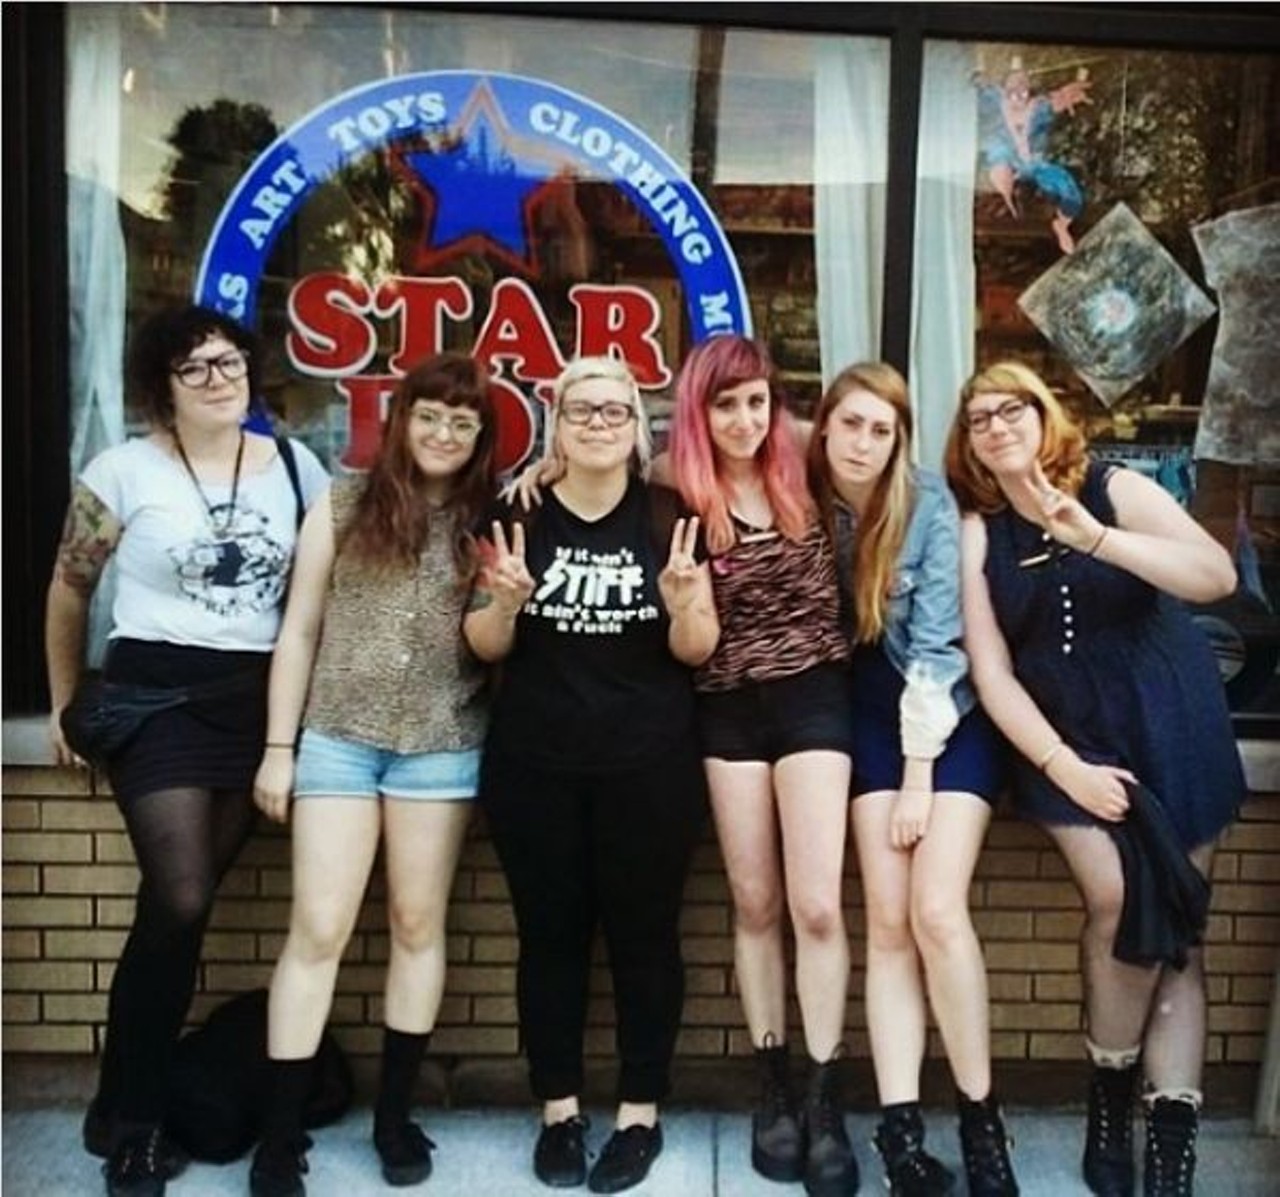  STAR POP Vintage + Modern
15813 Waterloo Rd, 216-965-2368
STAR POP specializes in clothing for the collector. Complete your "Stranger Things" cosplay at this retro pop culture paradise. 
Photo via pottymouthworld/Instagram